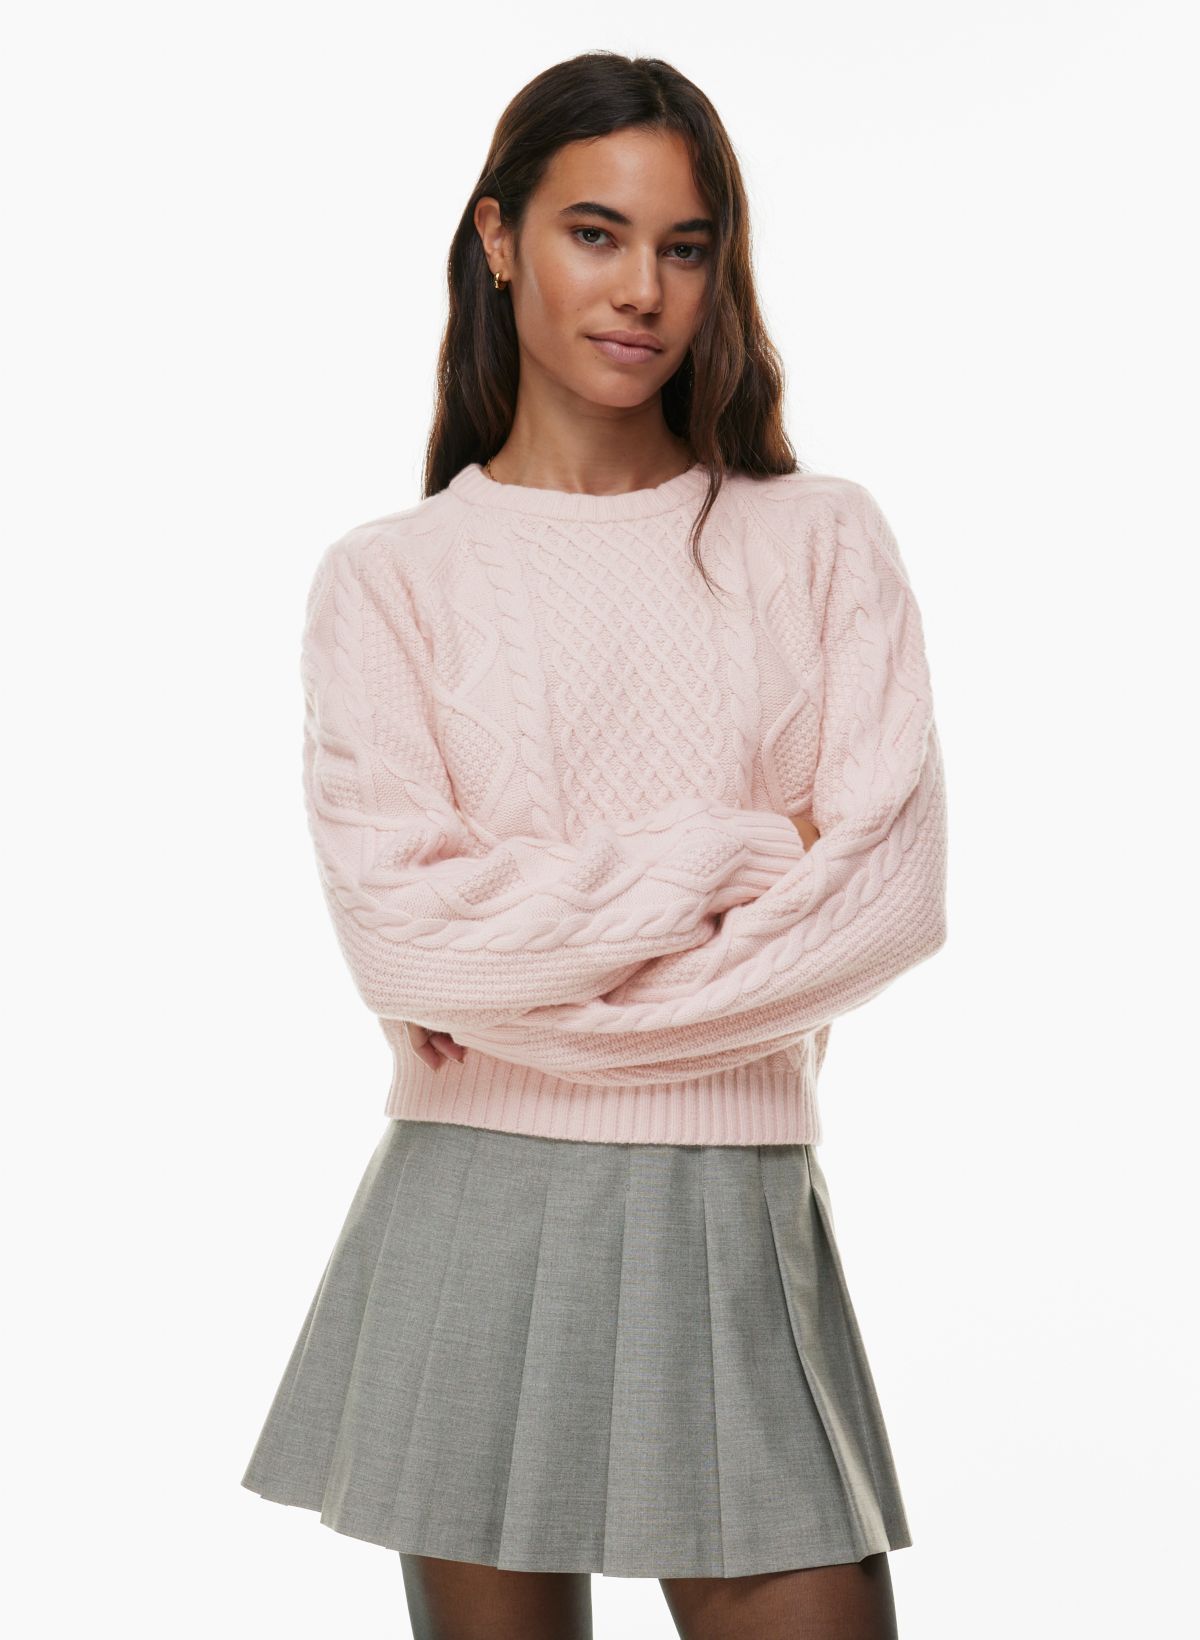 29 Cozy Sweaters To Live Your Best Fall Life